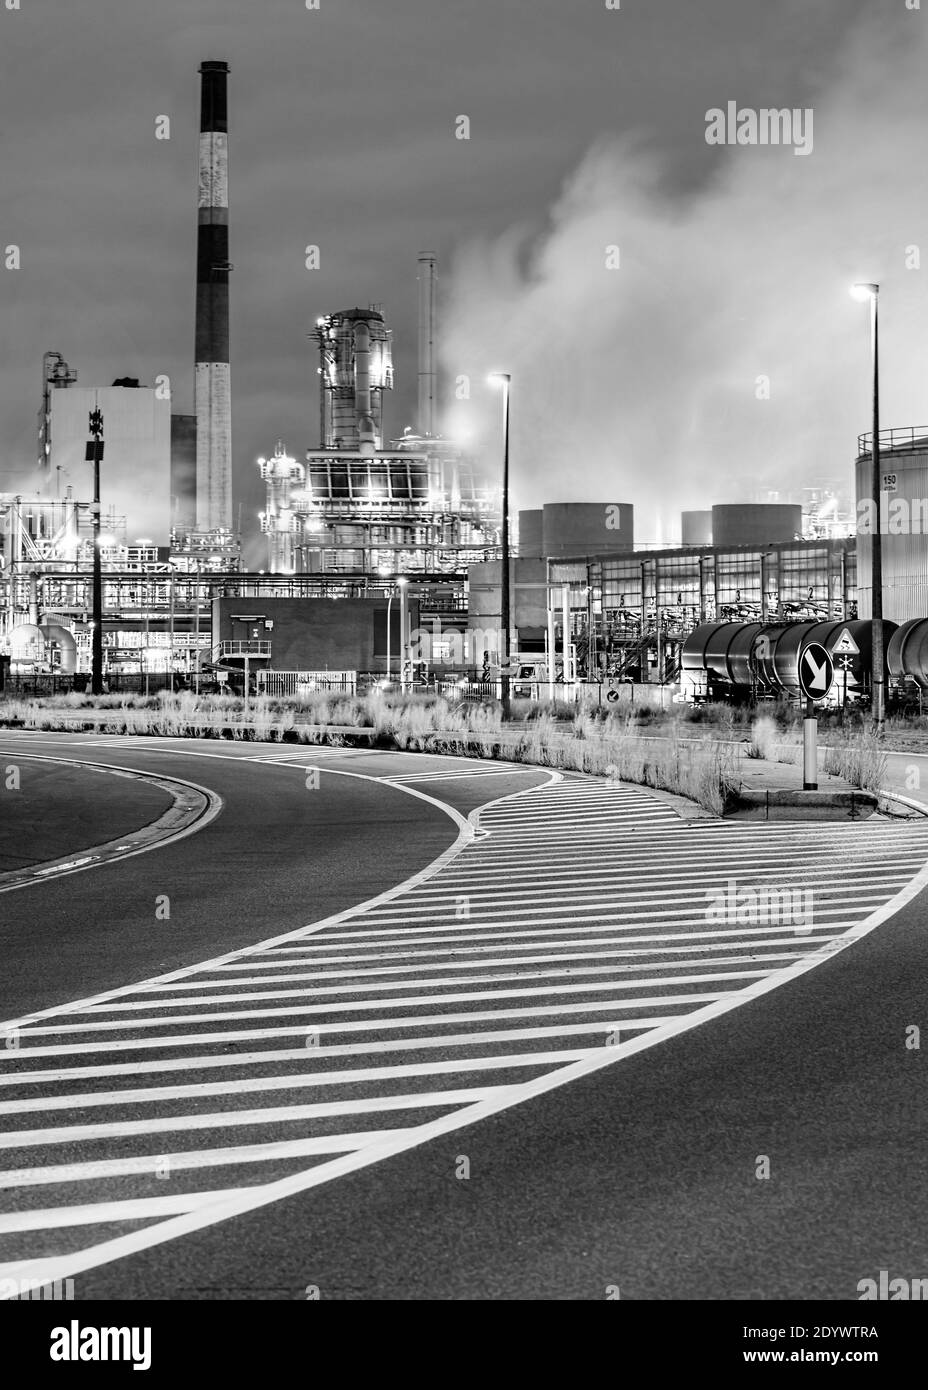 Twilight scene with road marks and petrochemical production plant on the background, Port of Antwerp, Belgium. Stock Photo